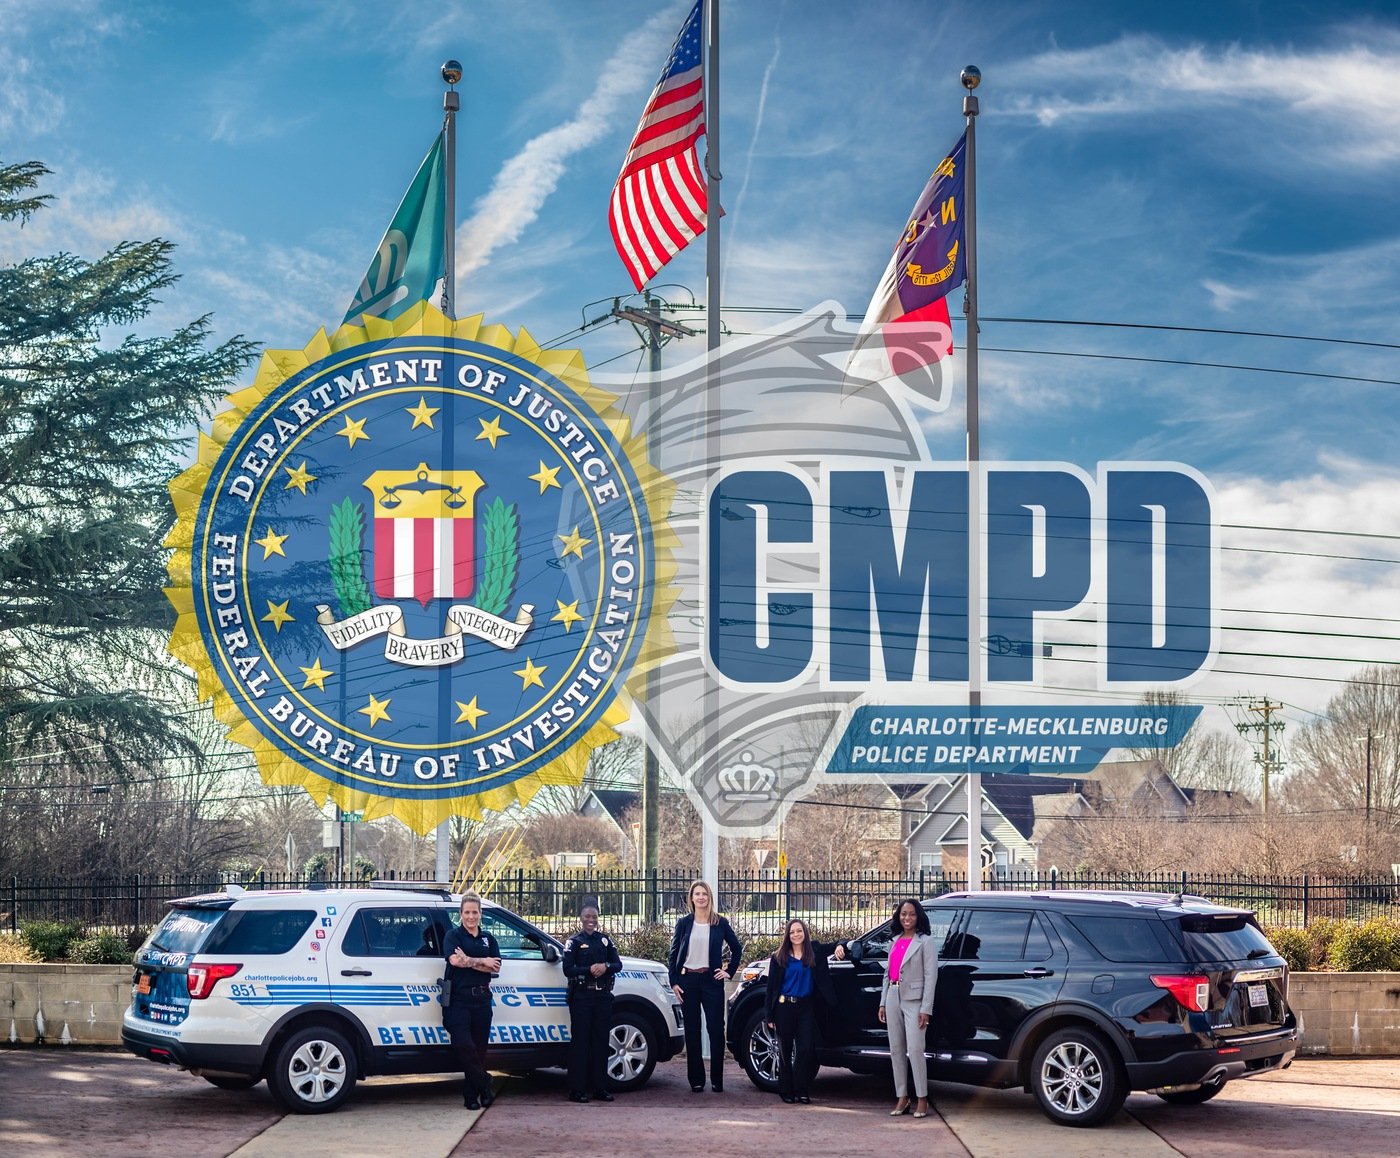 This graphic features the branding of the FBI and of the Charlotte-Mecklenburg Police Department superimposed onto a photo of five female law enforcement officers standing in front of a CMPD vehicle and a black SUV. A fence and three flags are shown in the background.